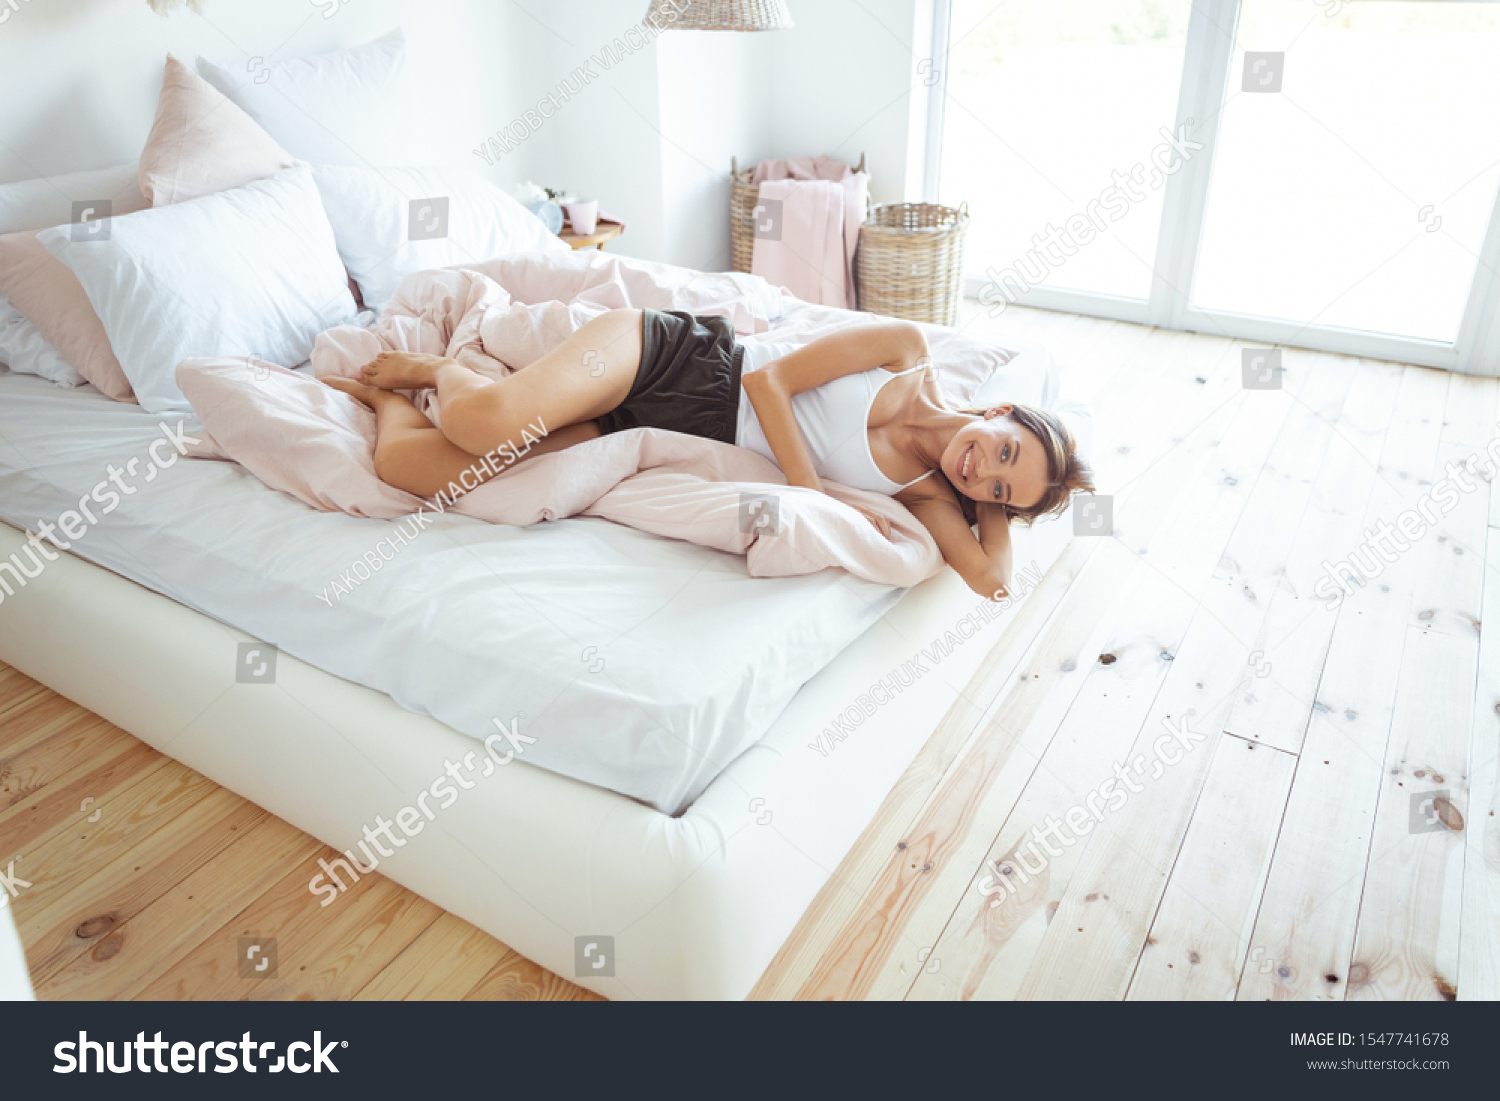 Tender bedclothes. Cute girl keeping smile on her face while spending morning in her bedroom #1547741678